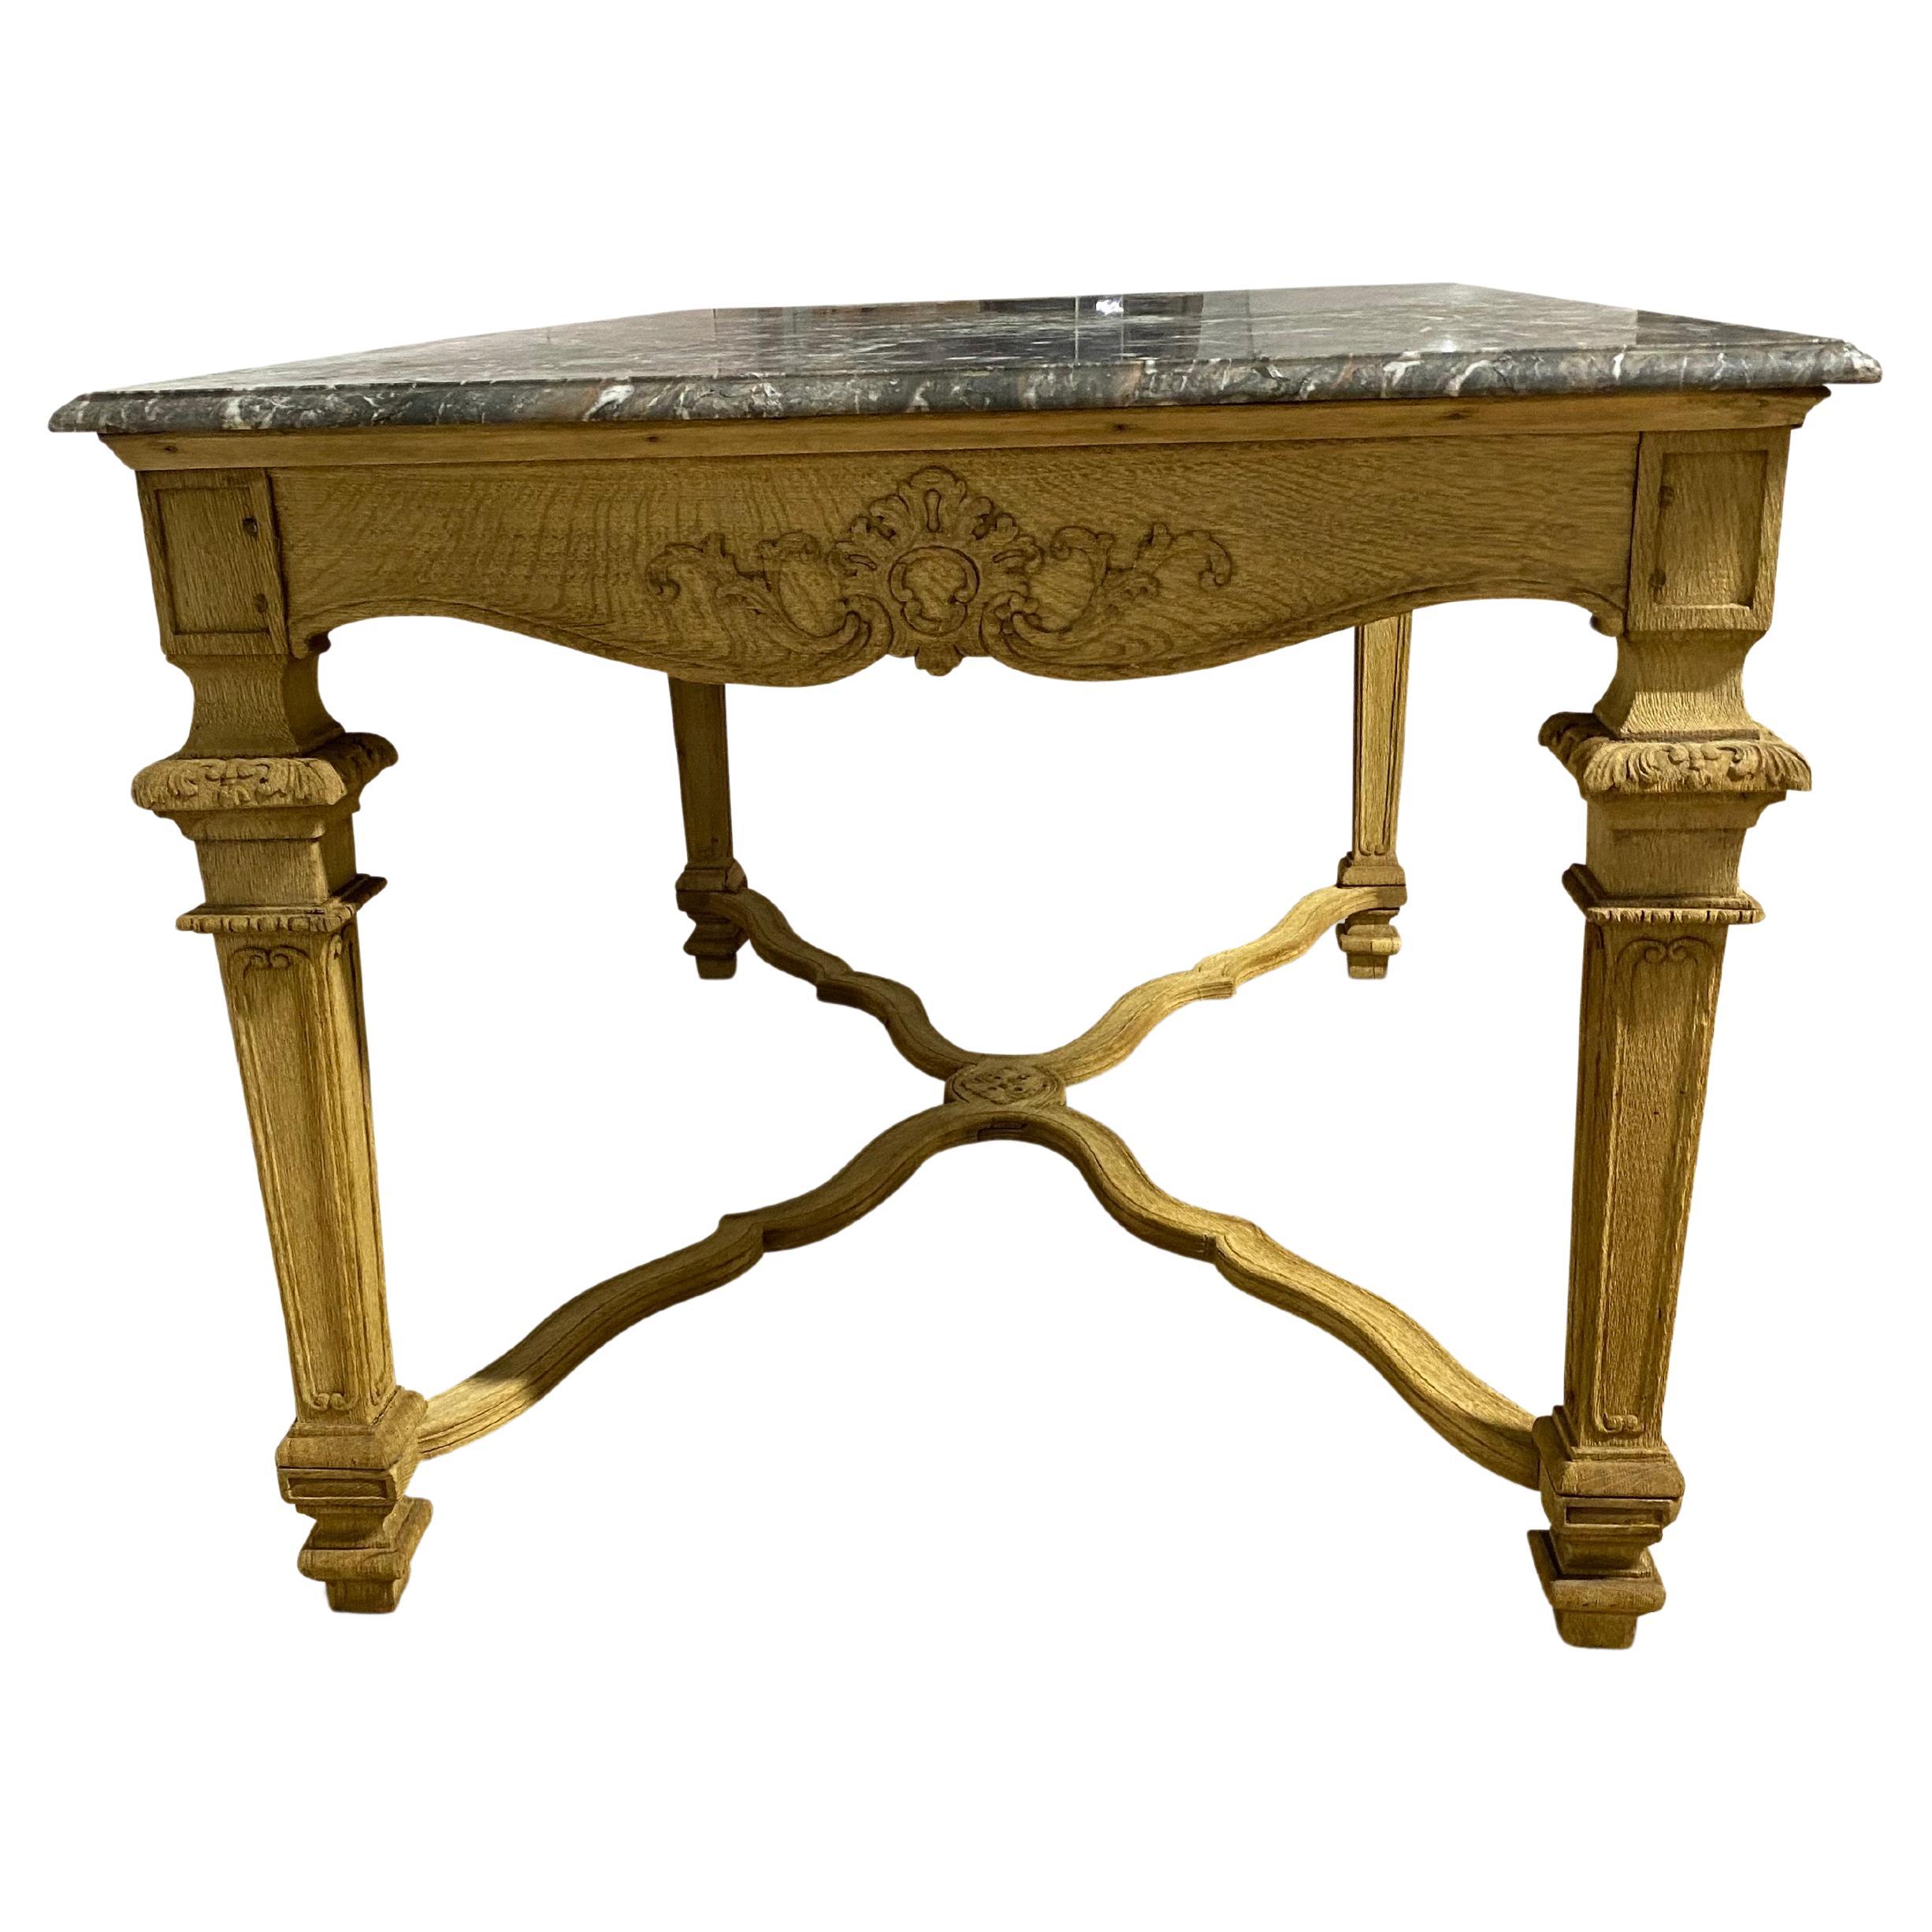 A stunning bleached 19th Century  Oak centre table with the original moulded Breccia Marble top.
Quality carving with floral images and a central cross stretcher.
The design make this into a highly stylish desirable and rare piece of French